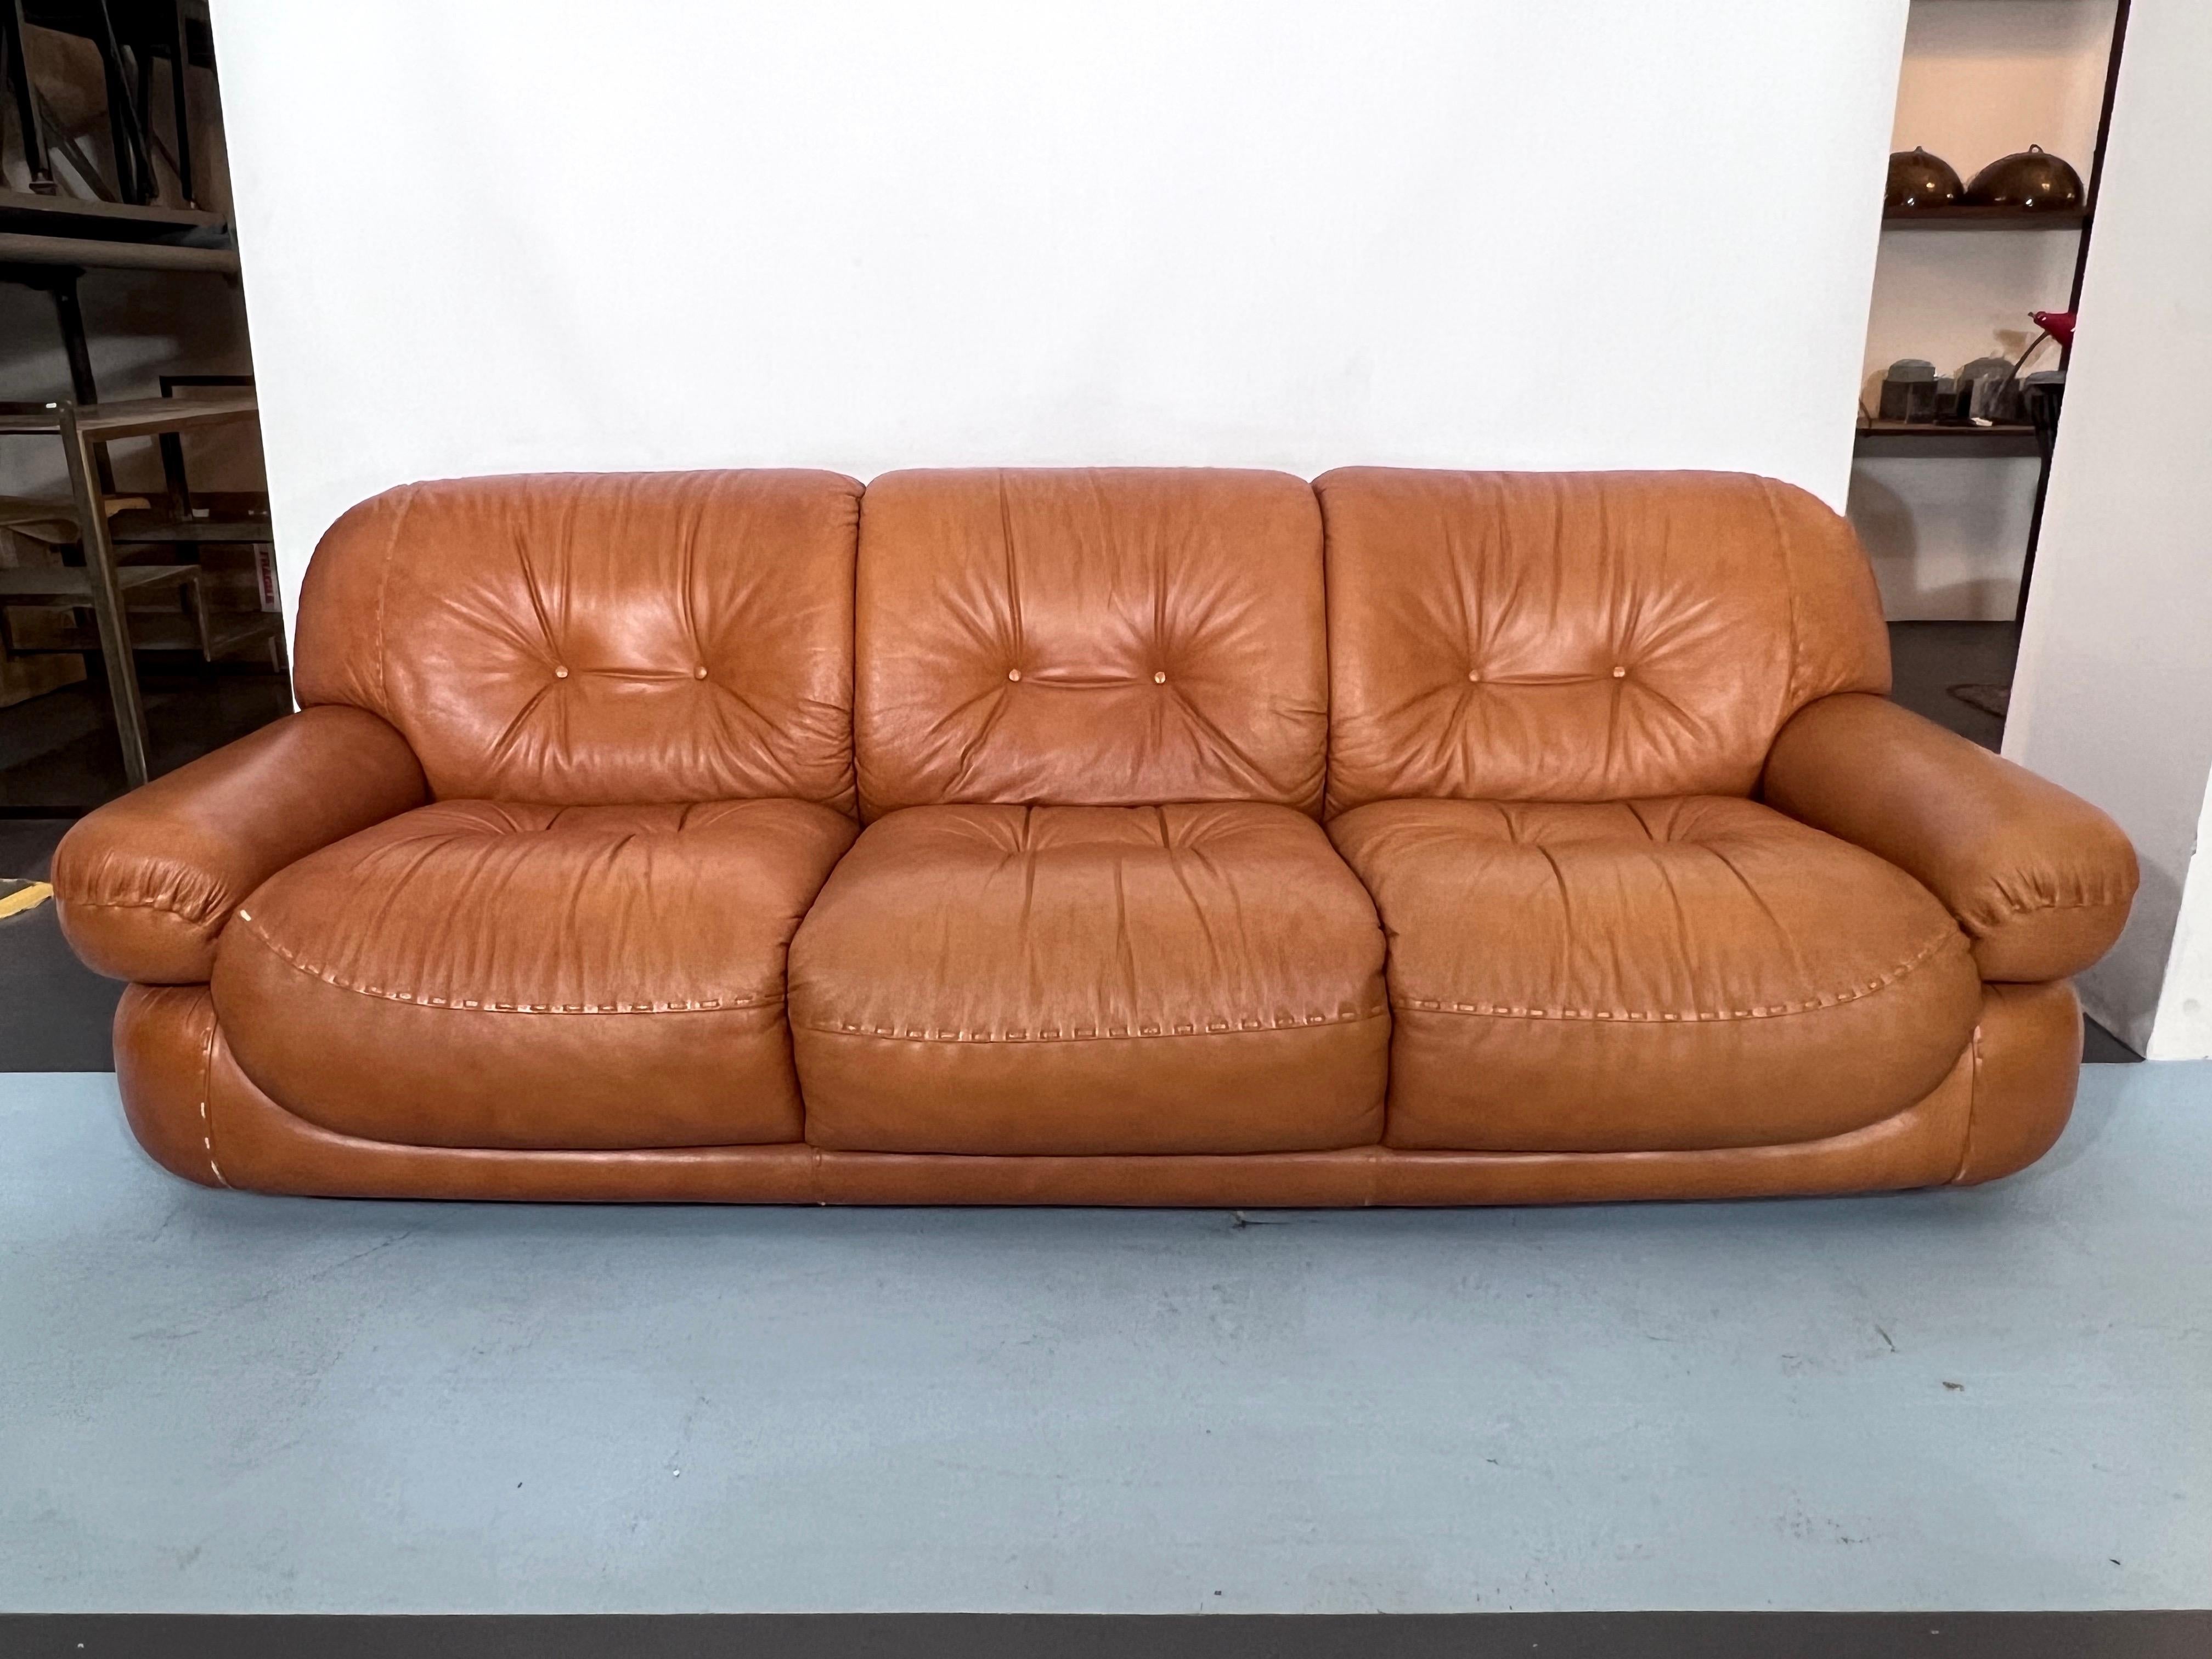 Italian Vintage Sofa Set in Cognac Leather by Sapporo for Mobil Girgi, Italy, 1970s For Sale